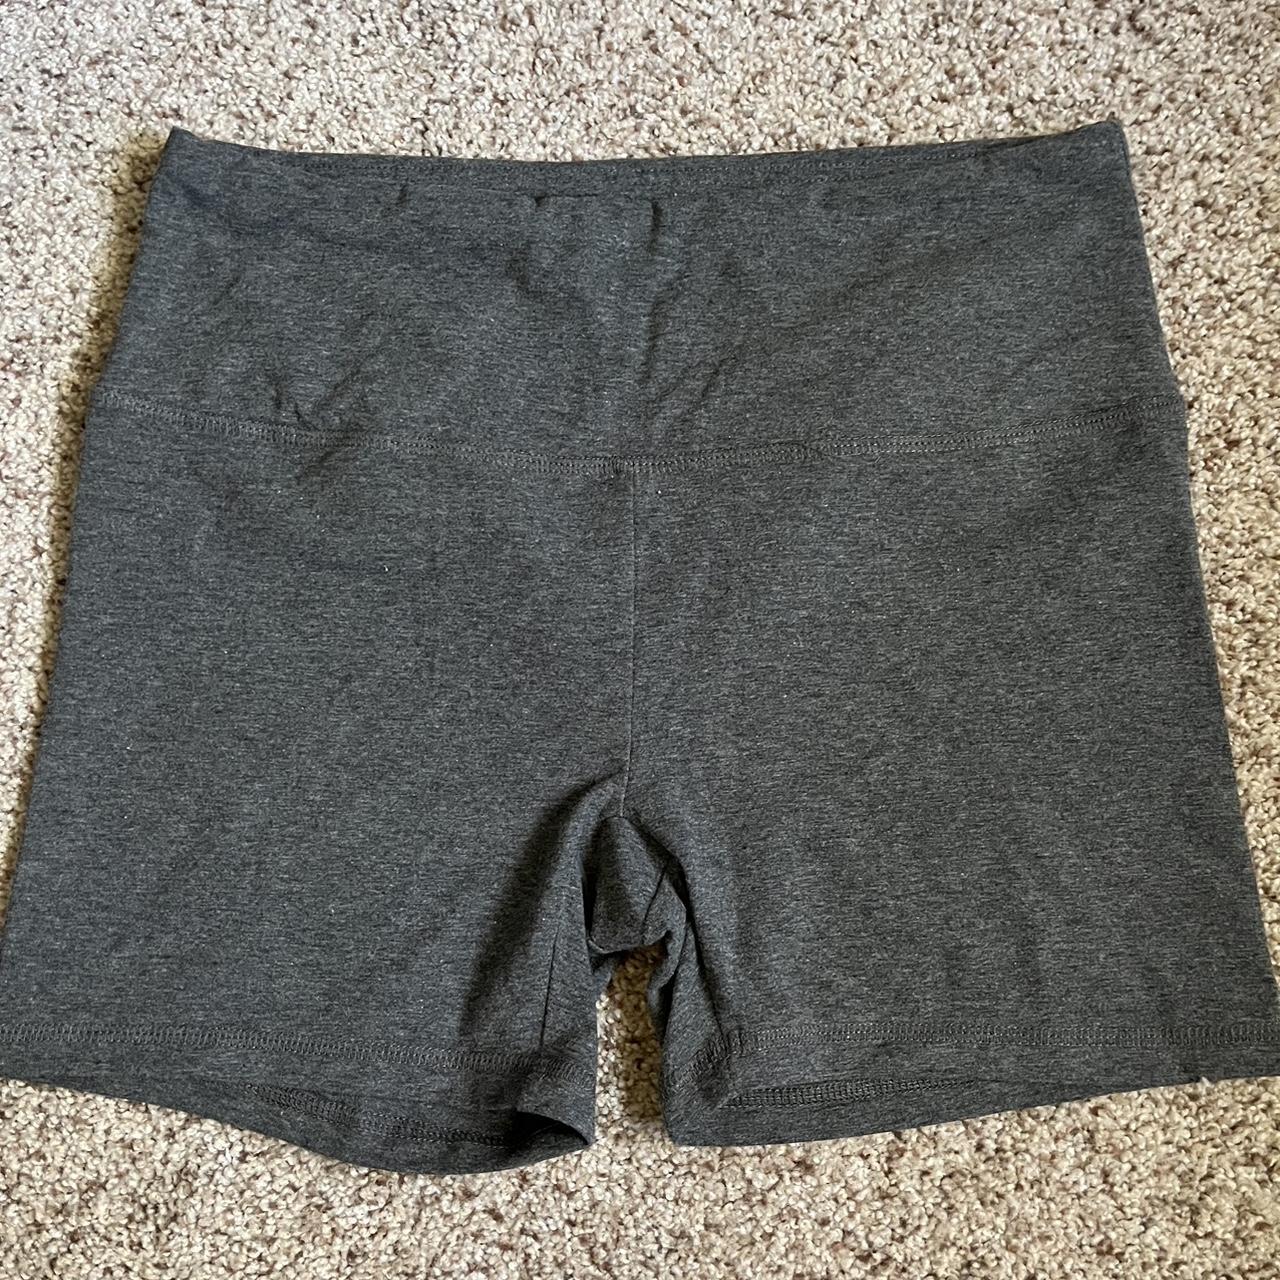 RBX Active Women's Black and Grey Shorts | Depop